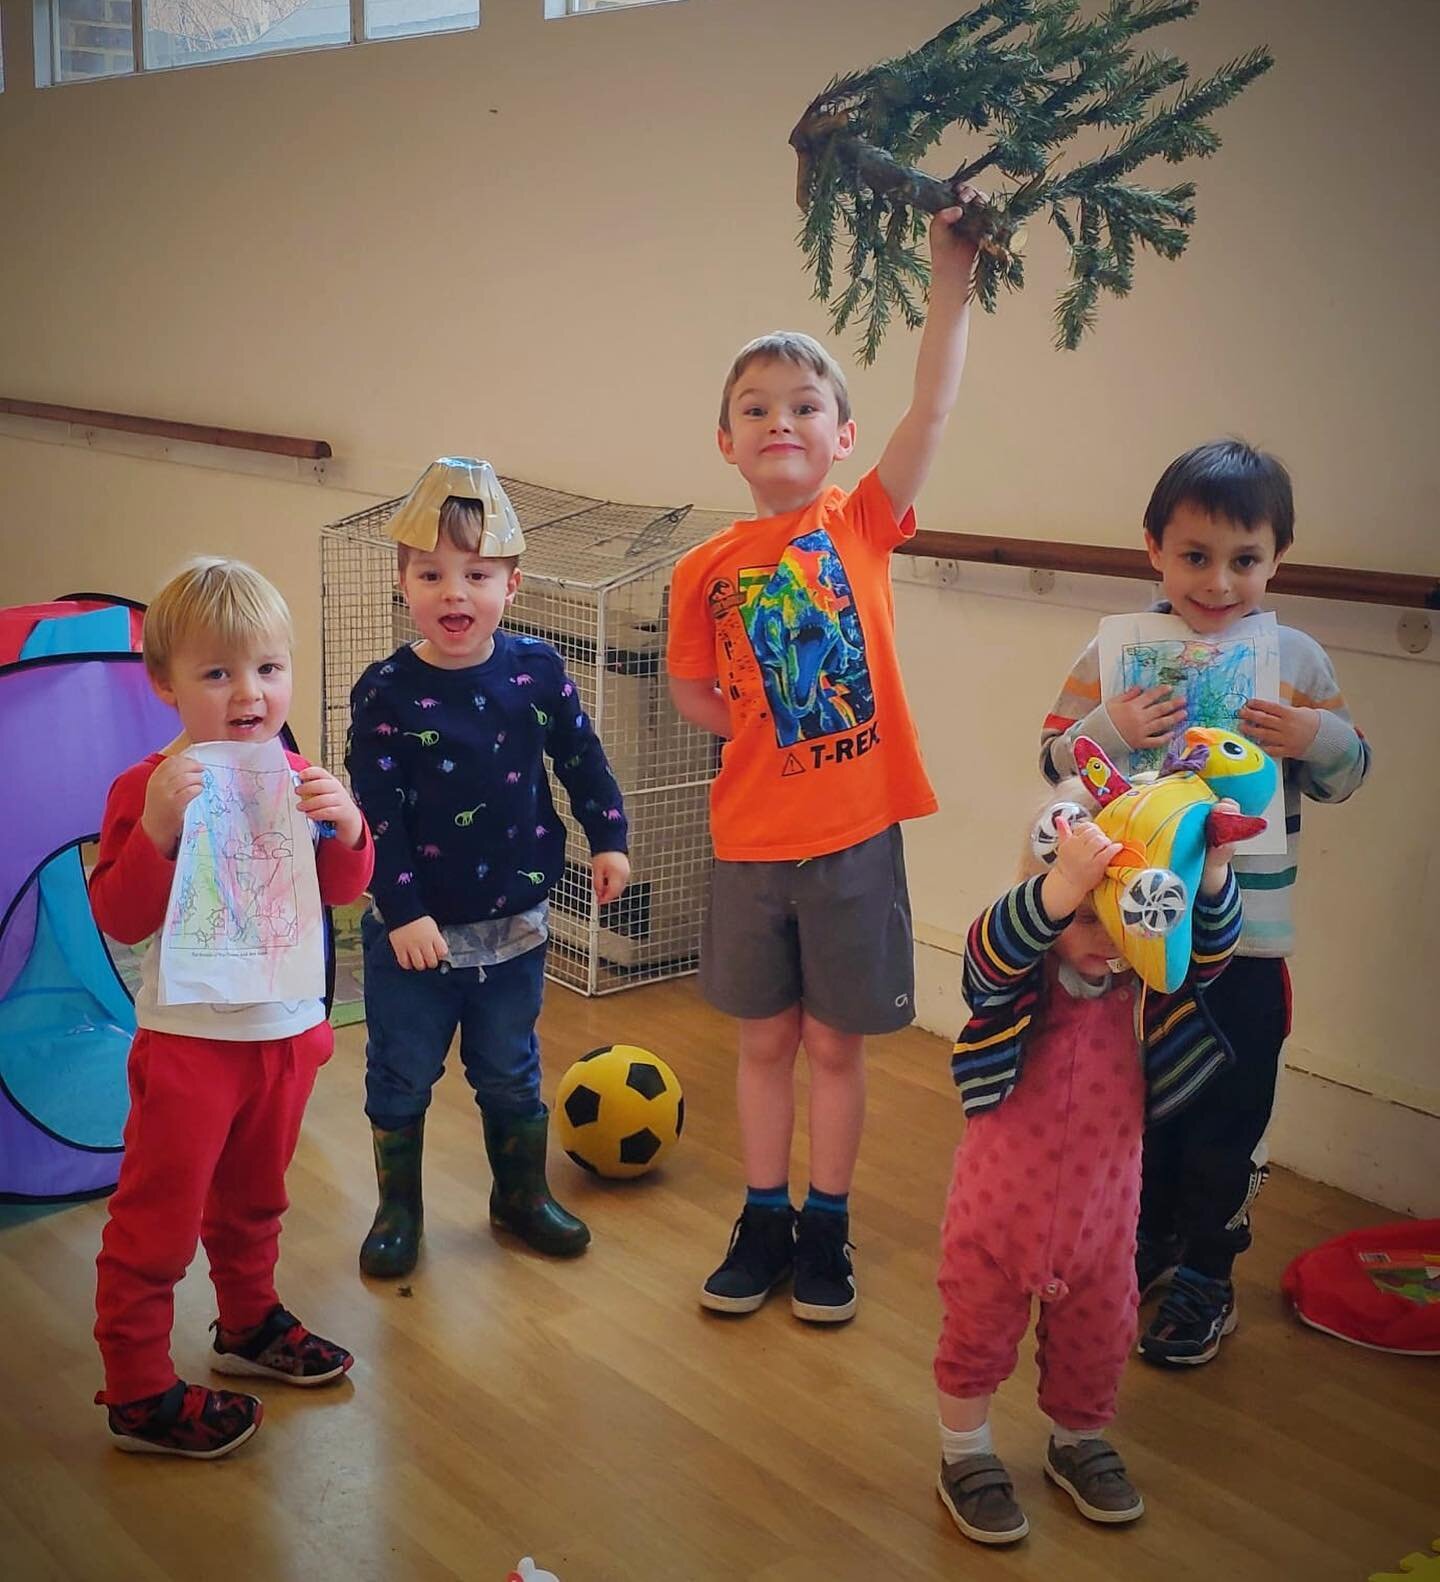 Who wants to learn more about Jesus? 😊🥳 

So good to see our young ones enjoying their time at kids&rsquo; church. 

#sundayschool #kids #church 

📸: @followjoherman